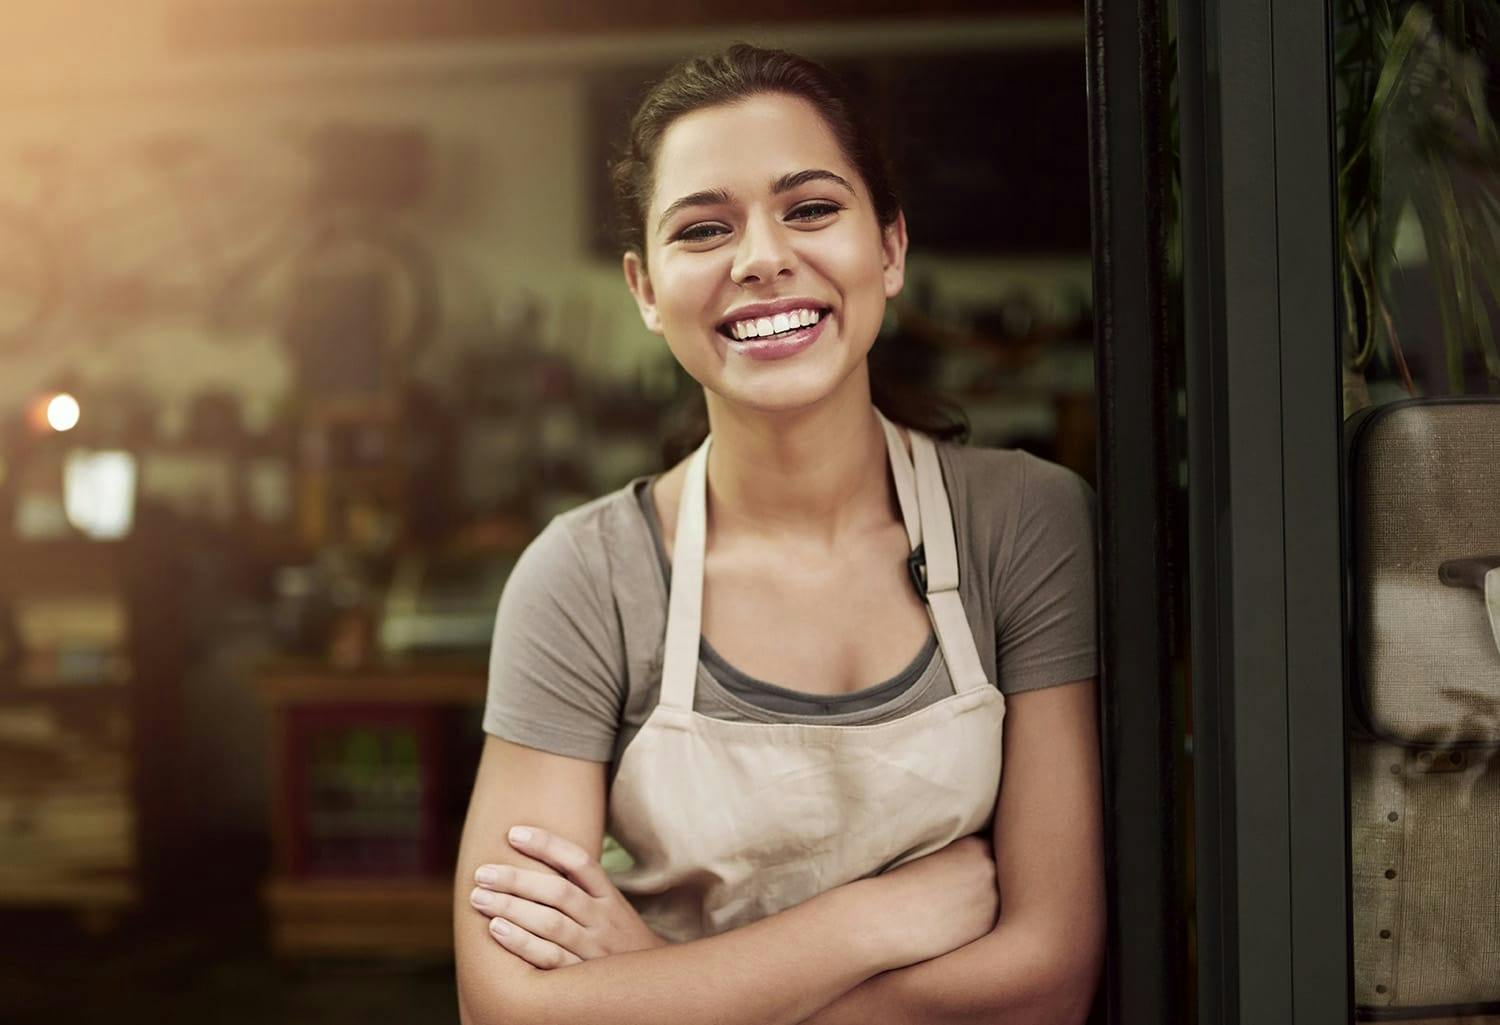 Woman in an apron, smiling